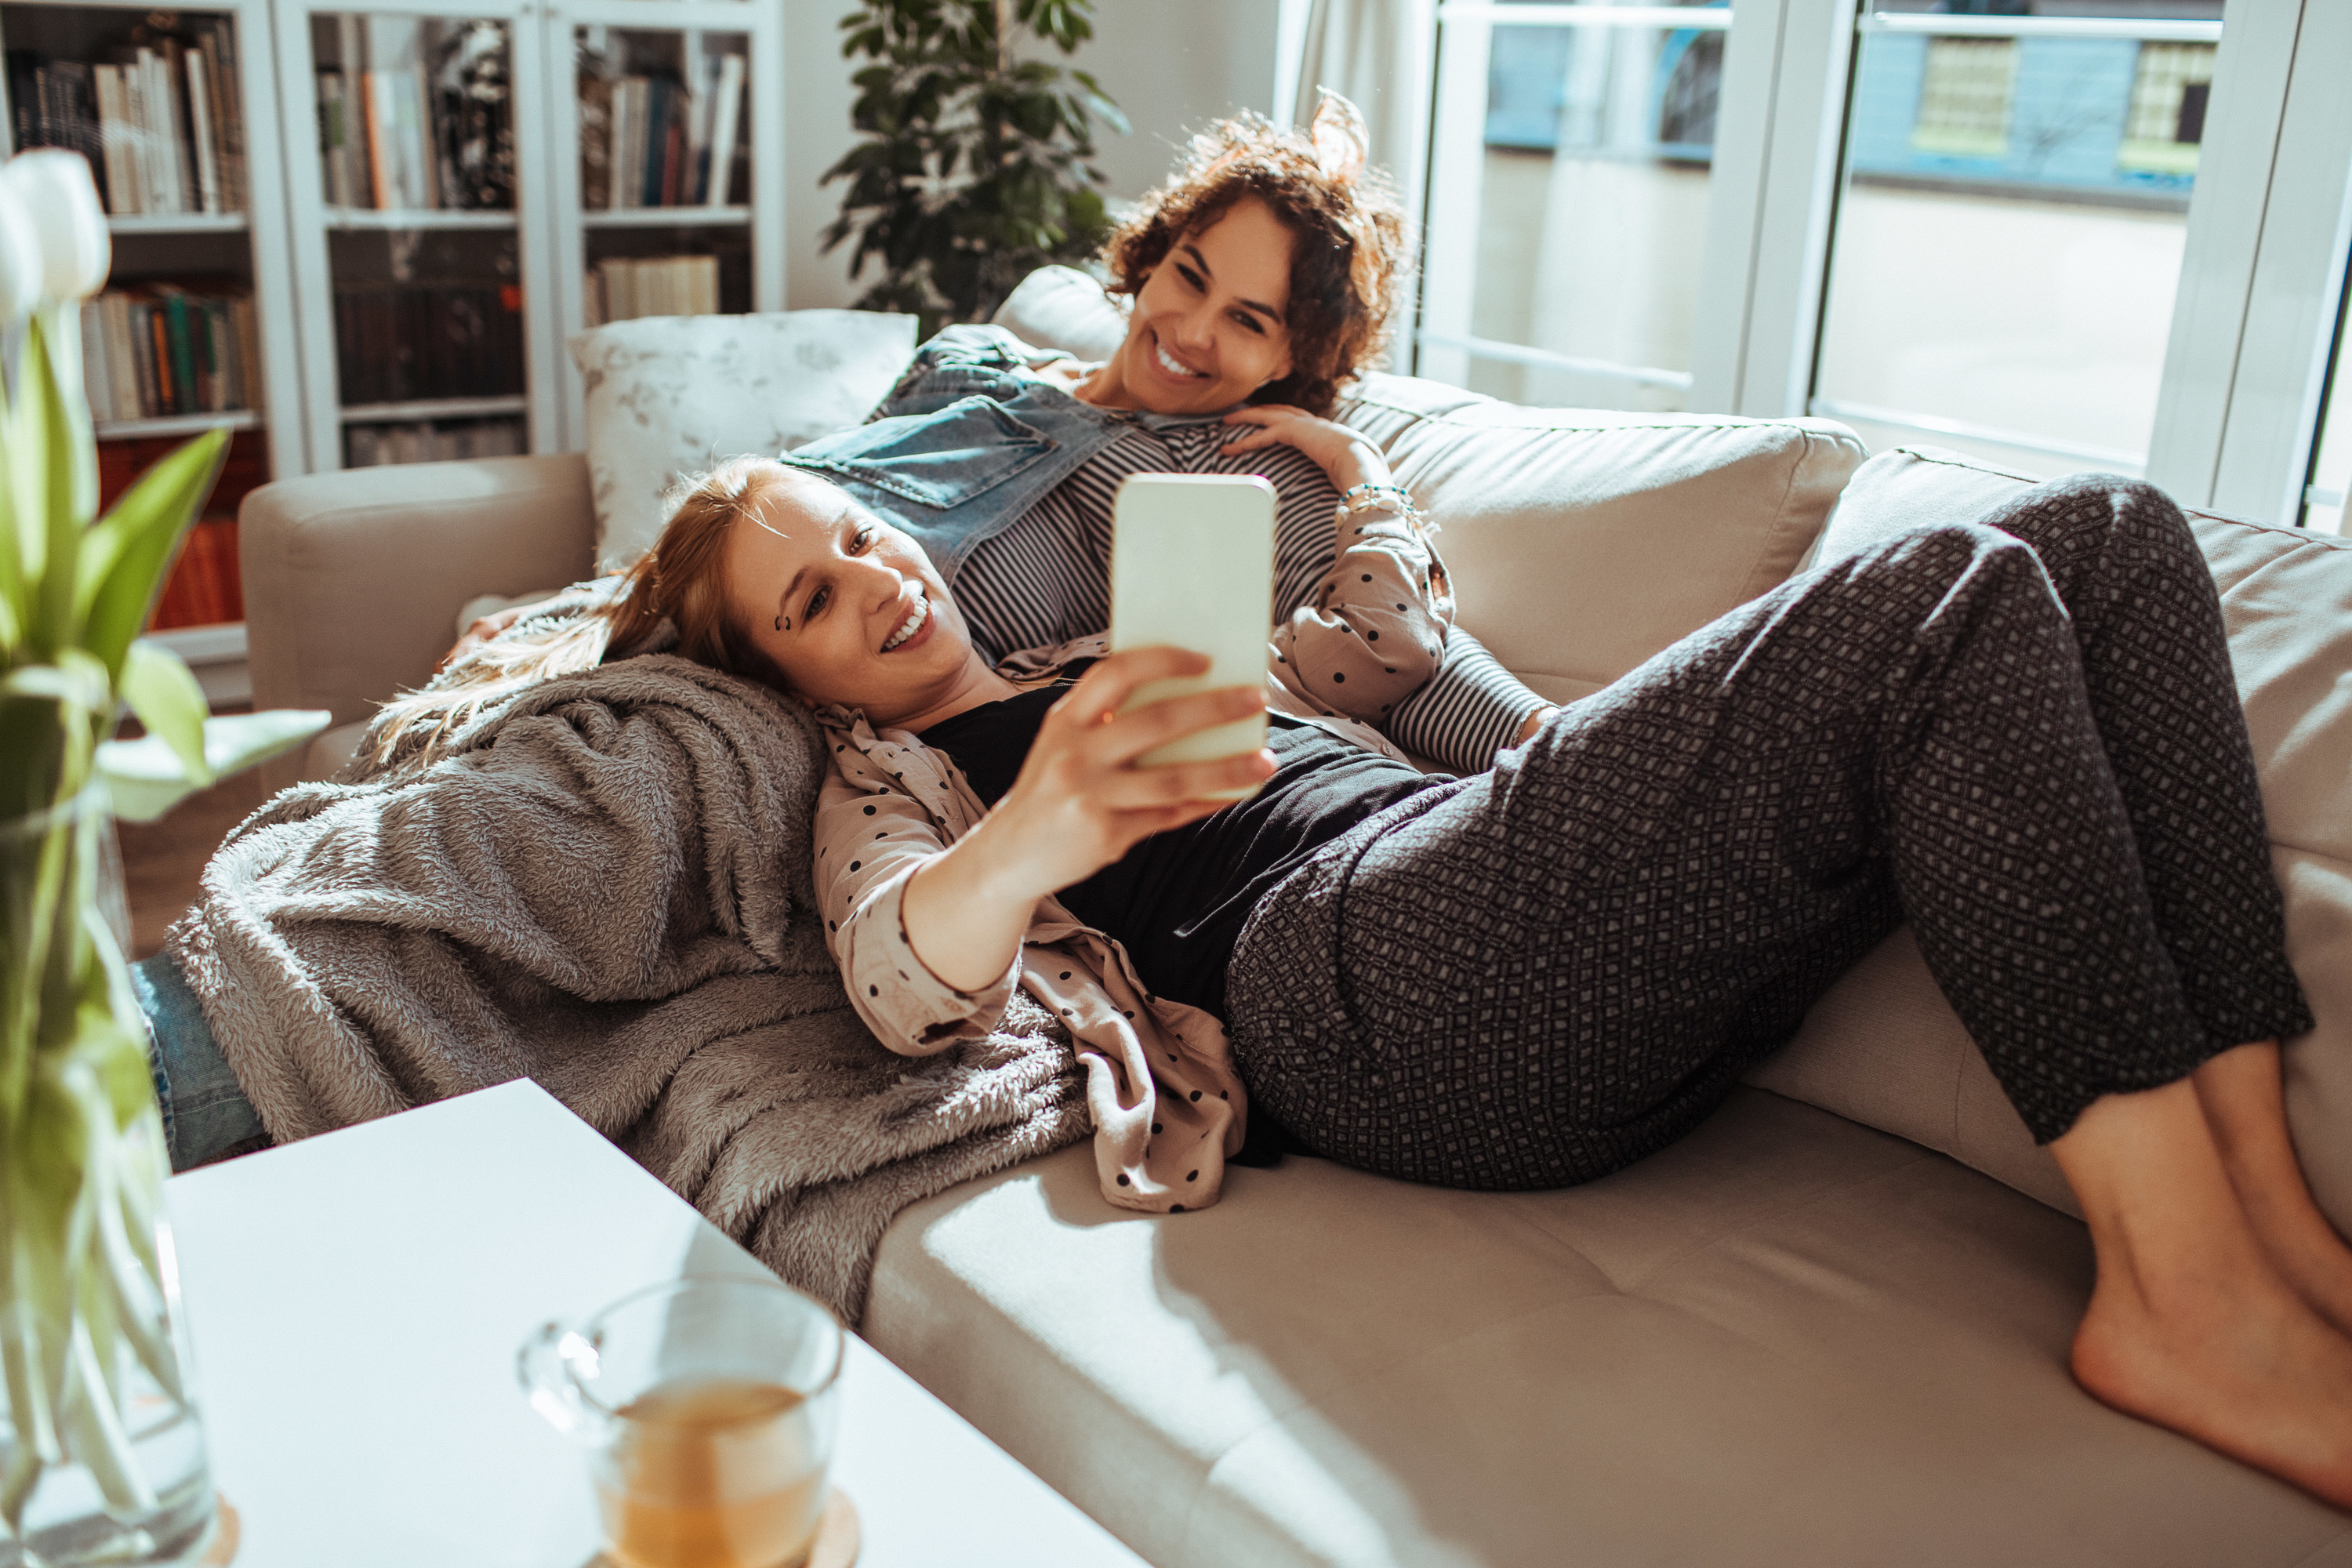 A couple taking pictures together on the couch